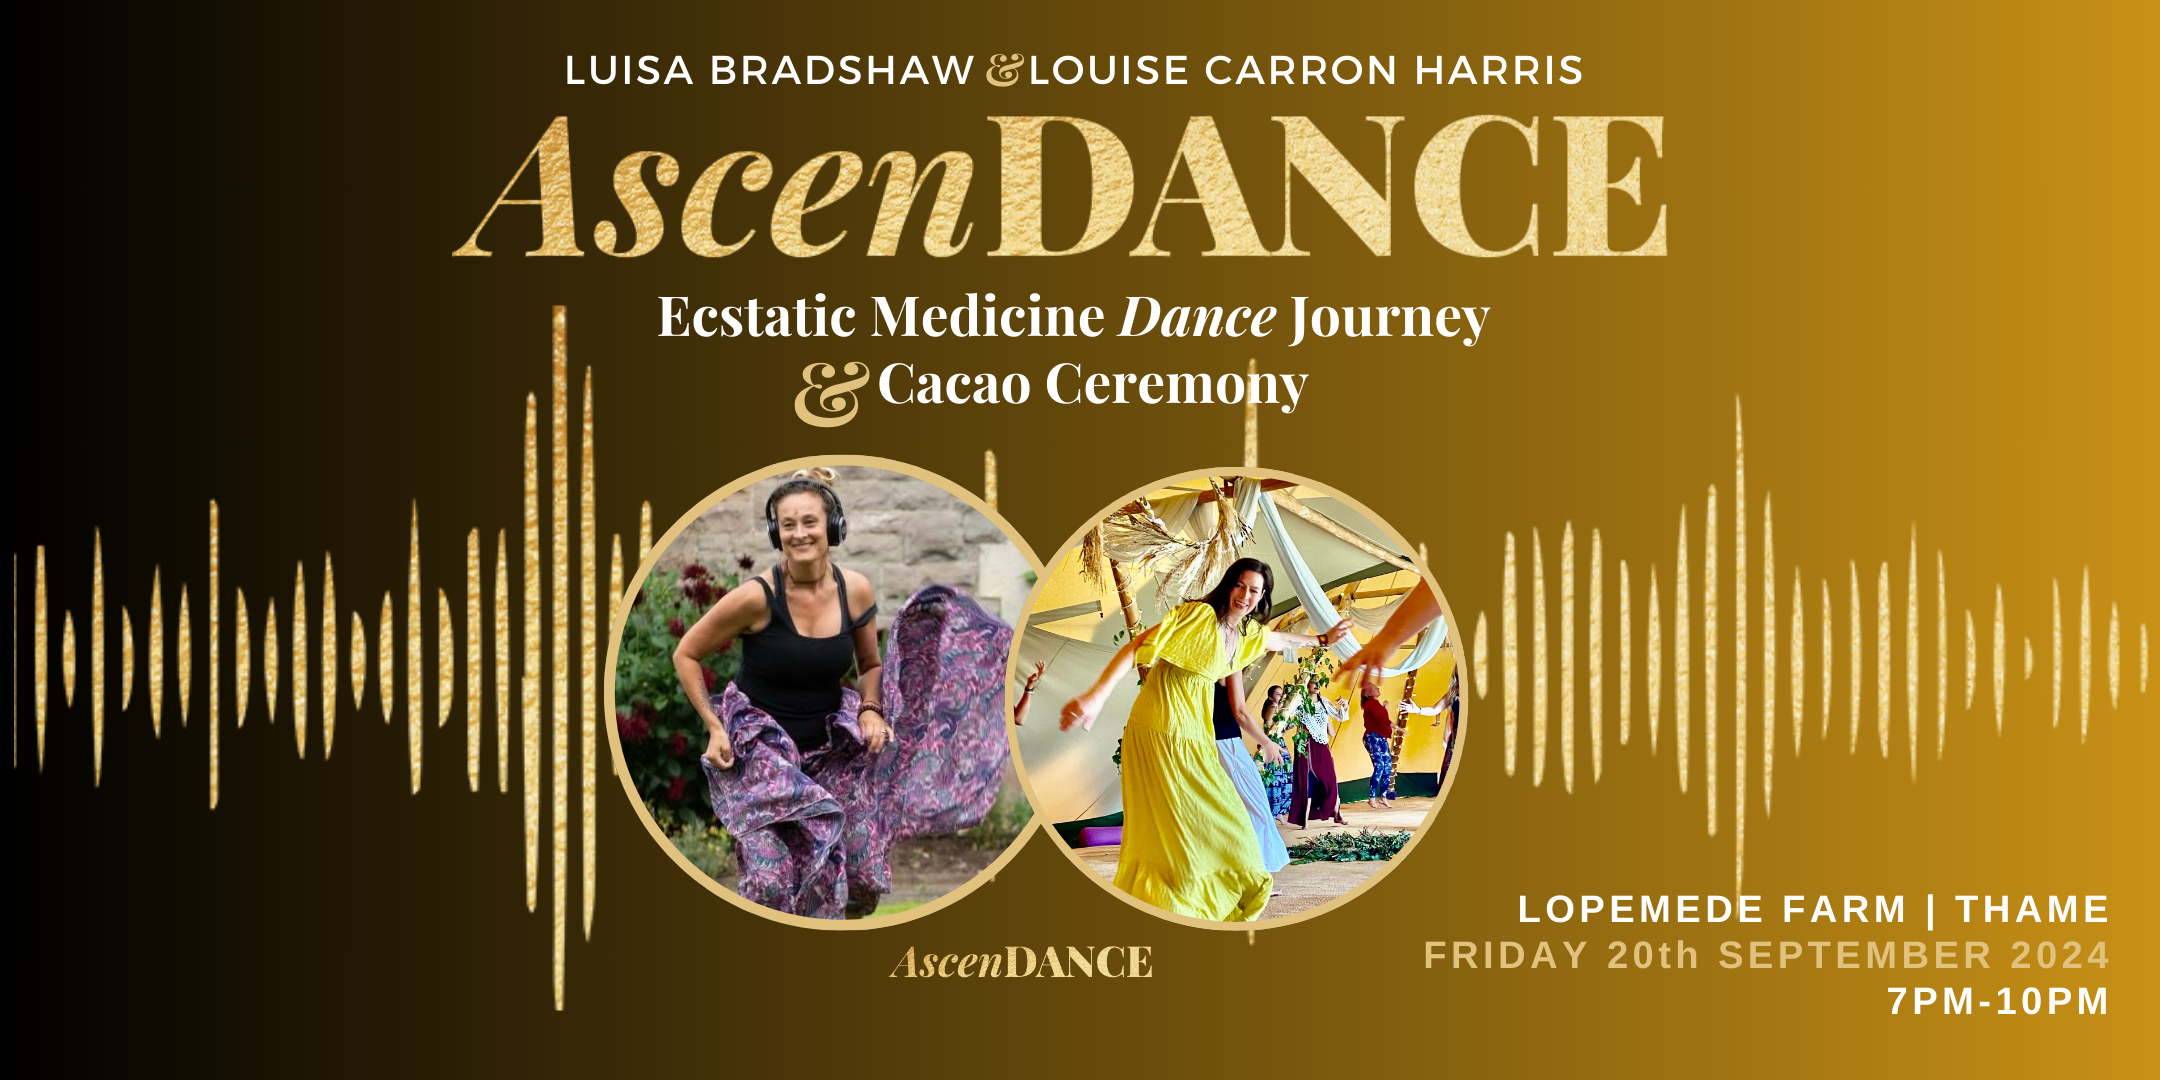 with Luisa & Louise Carron Harris<br />
Friday 20th Sept,  7-10pm<br />
Lopemede Farm, Thame</p>
<p>Another unforgettable Ecstatic Medicine Dance journey, Sacred Cacao & Fire ceremony. 